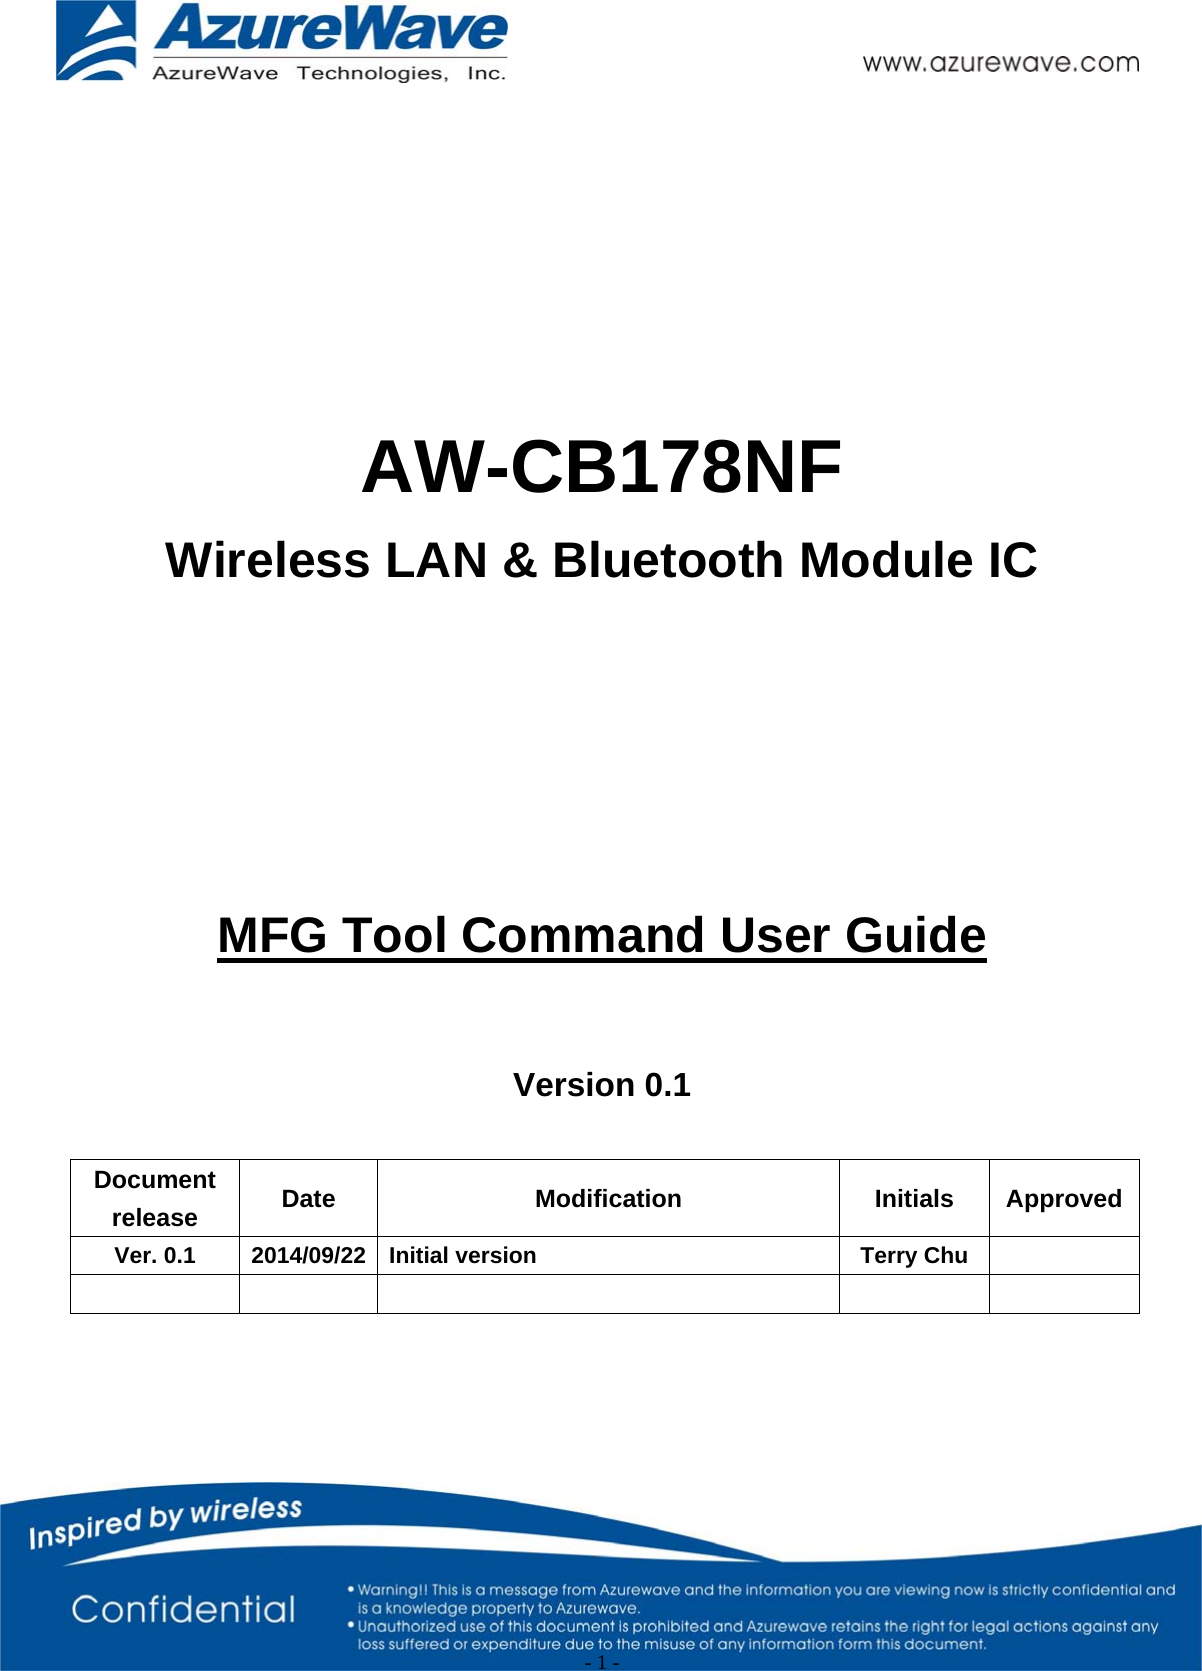                                                   - 1 -       AW-CB178NF Wireless LAN &amp; Bluetooth Module IC     MFG Tool Command User Guide  Version 0.1  Document release  Date Modification Initials ApprovedVer. 0.1  2014/09/22  Initial version  Terry Chu            